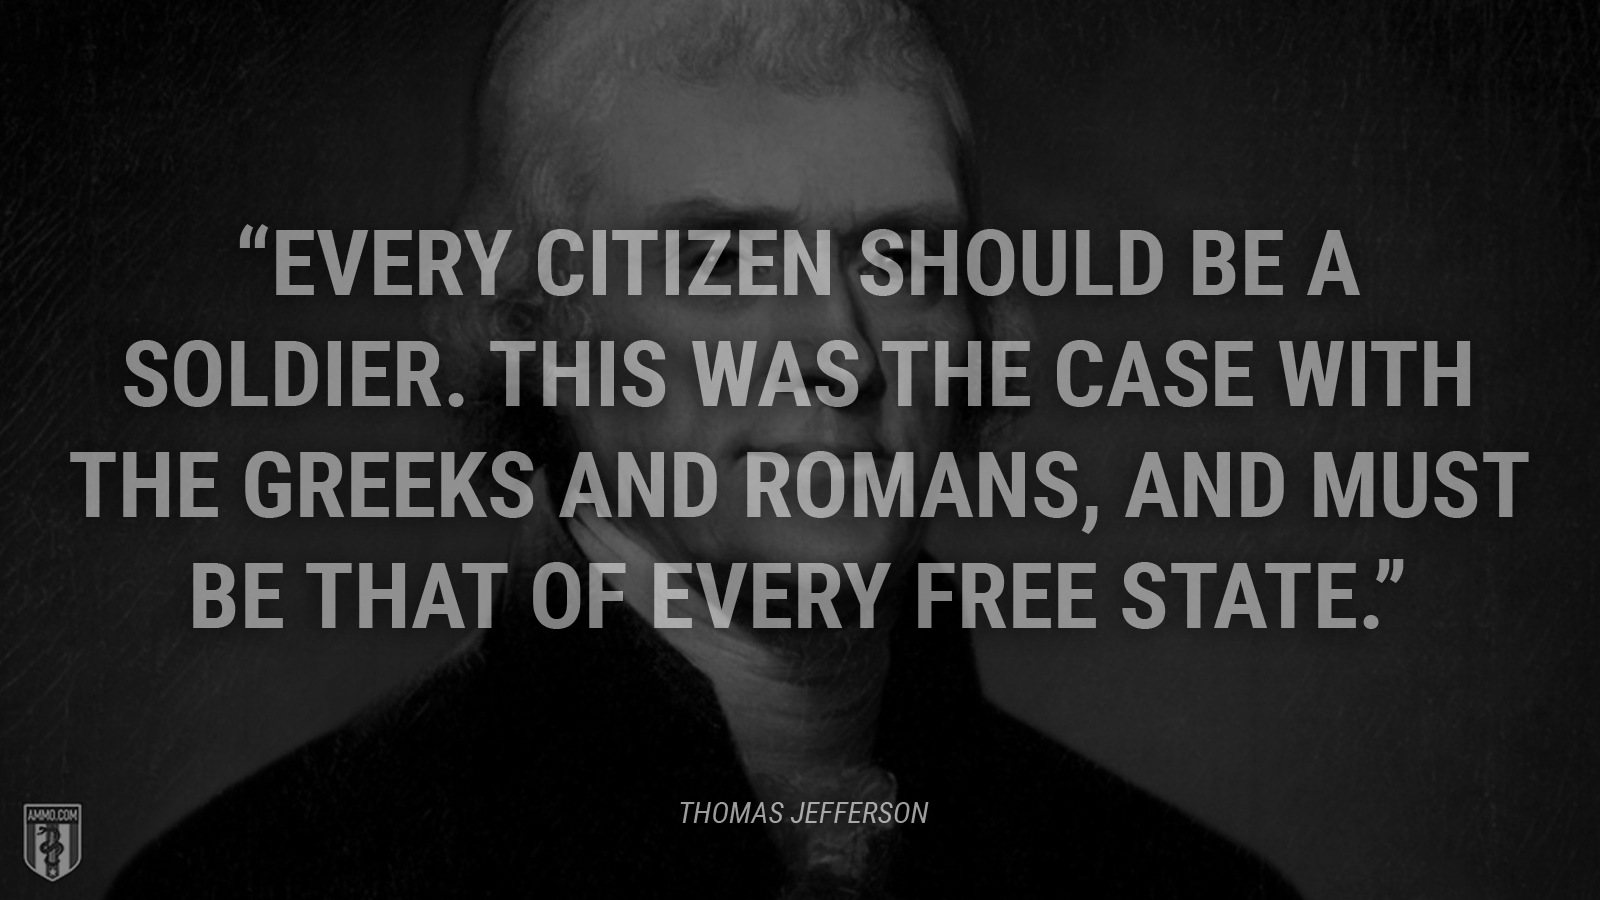 “Every citizen should be a soldier. This was the case with the Greeks and Romans, and must be that of every free state.” - Thomas Jefferson